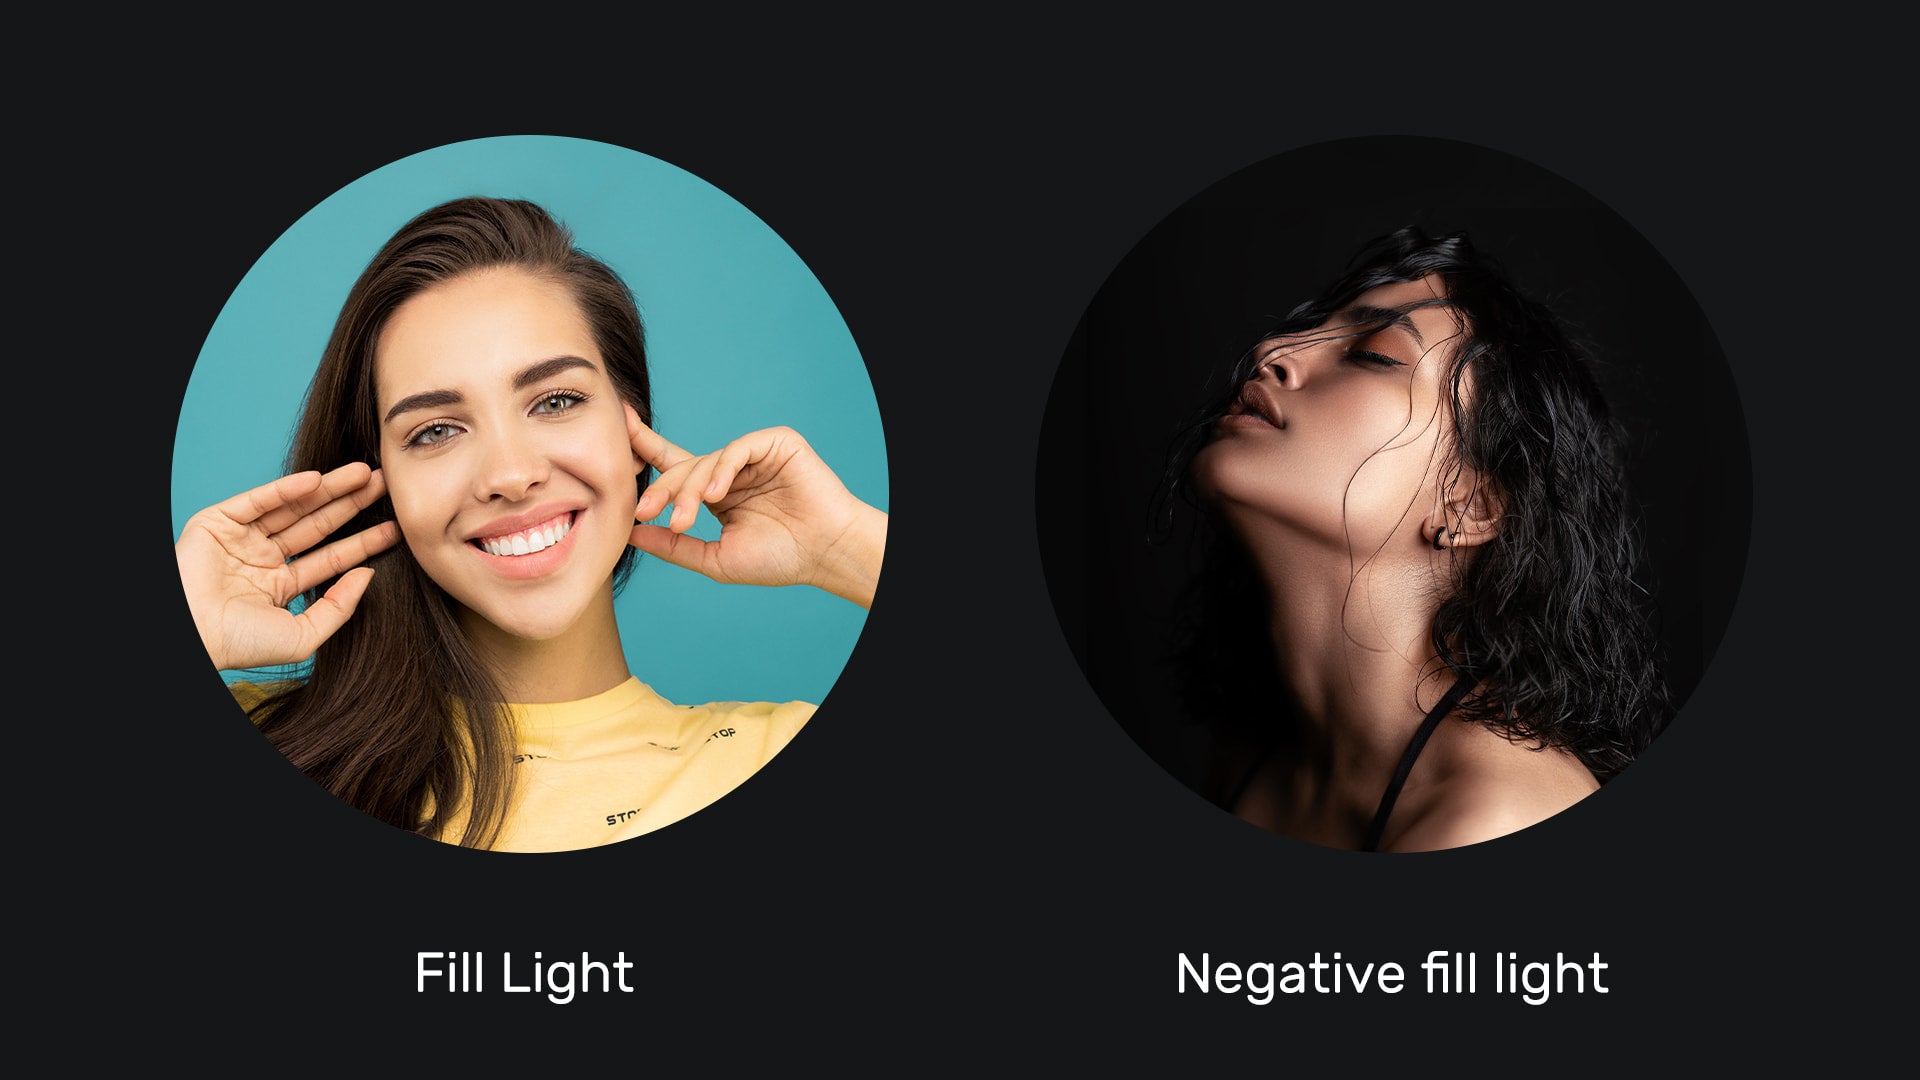 How to use negative fill light in photography? – COLBOR